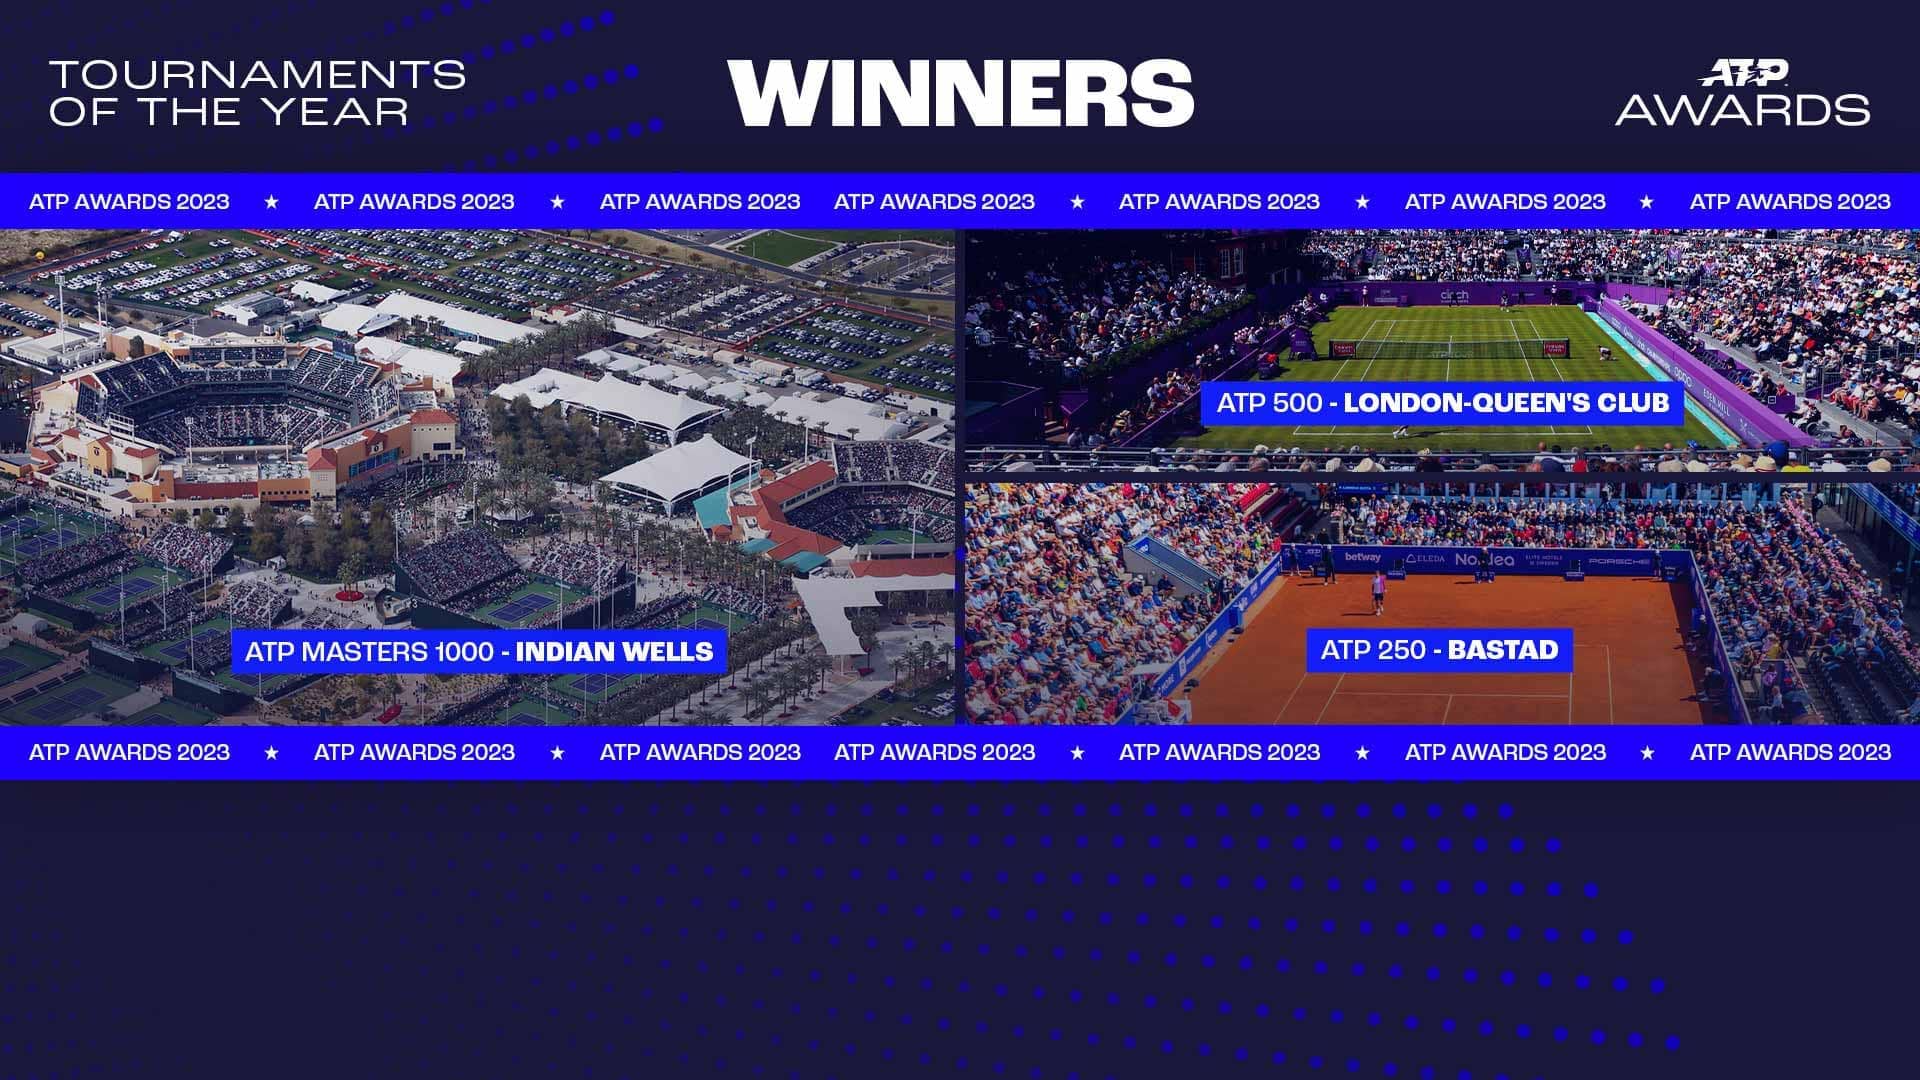 Indian Wells, London-Queen's Club, Bastad Named 2023 ATP Tournaments Of The Year